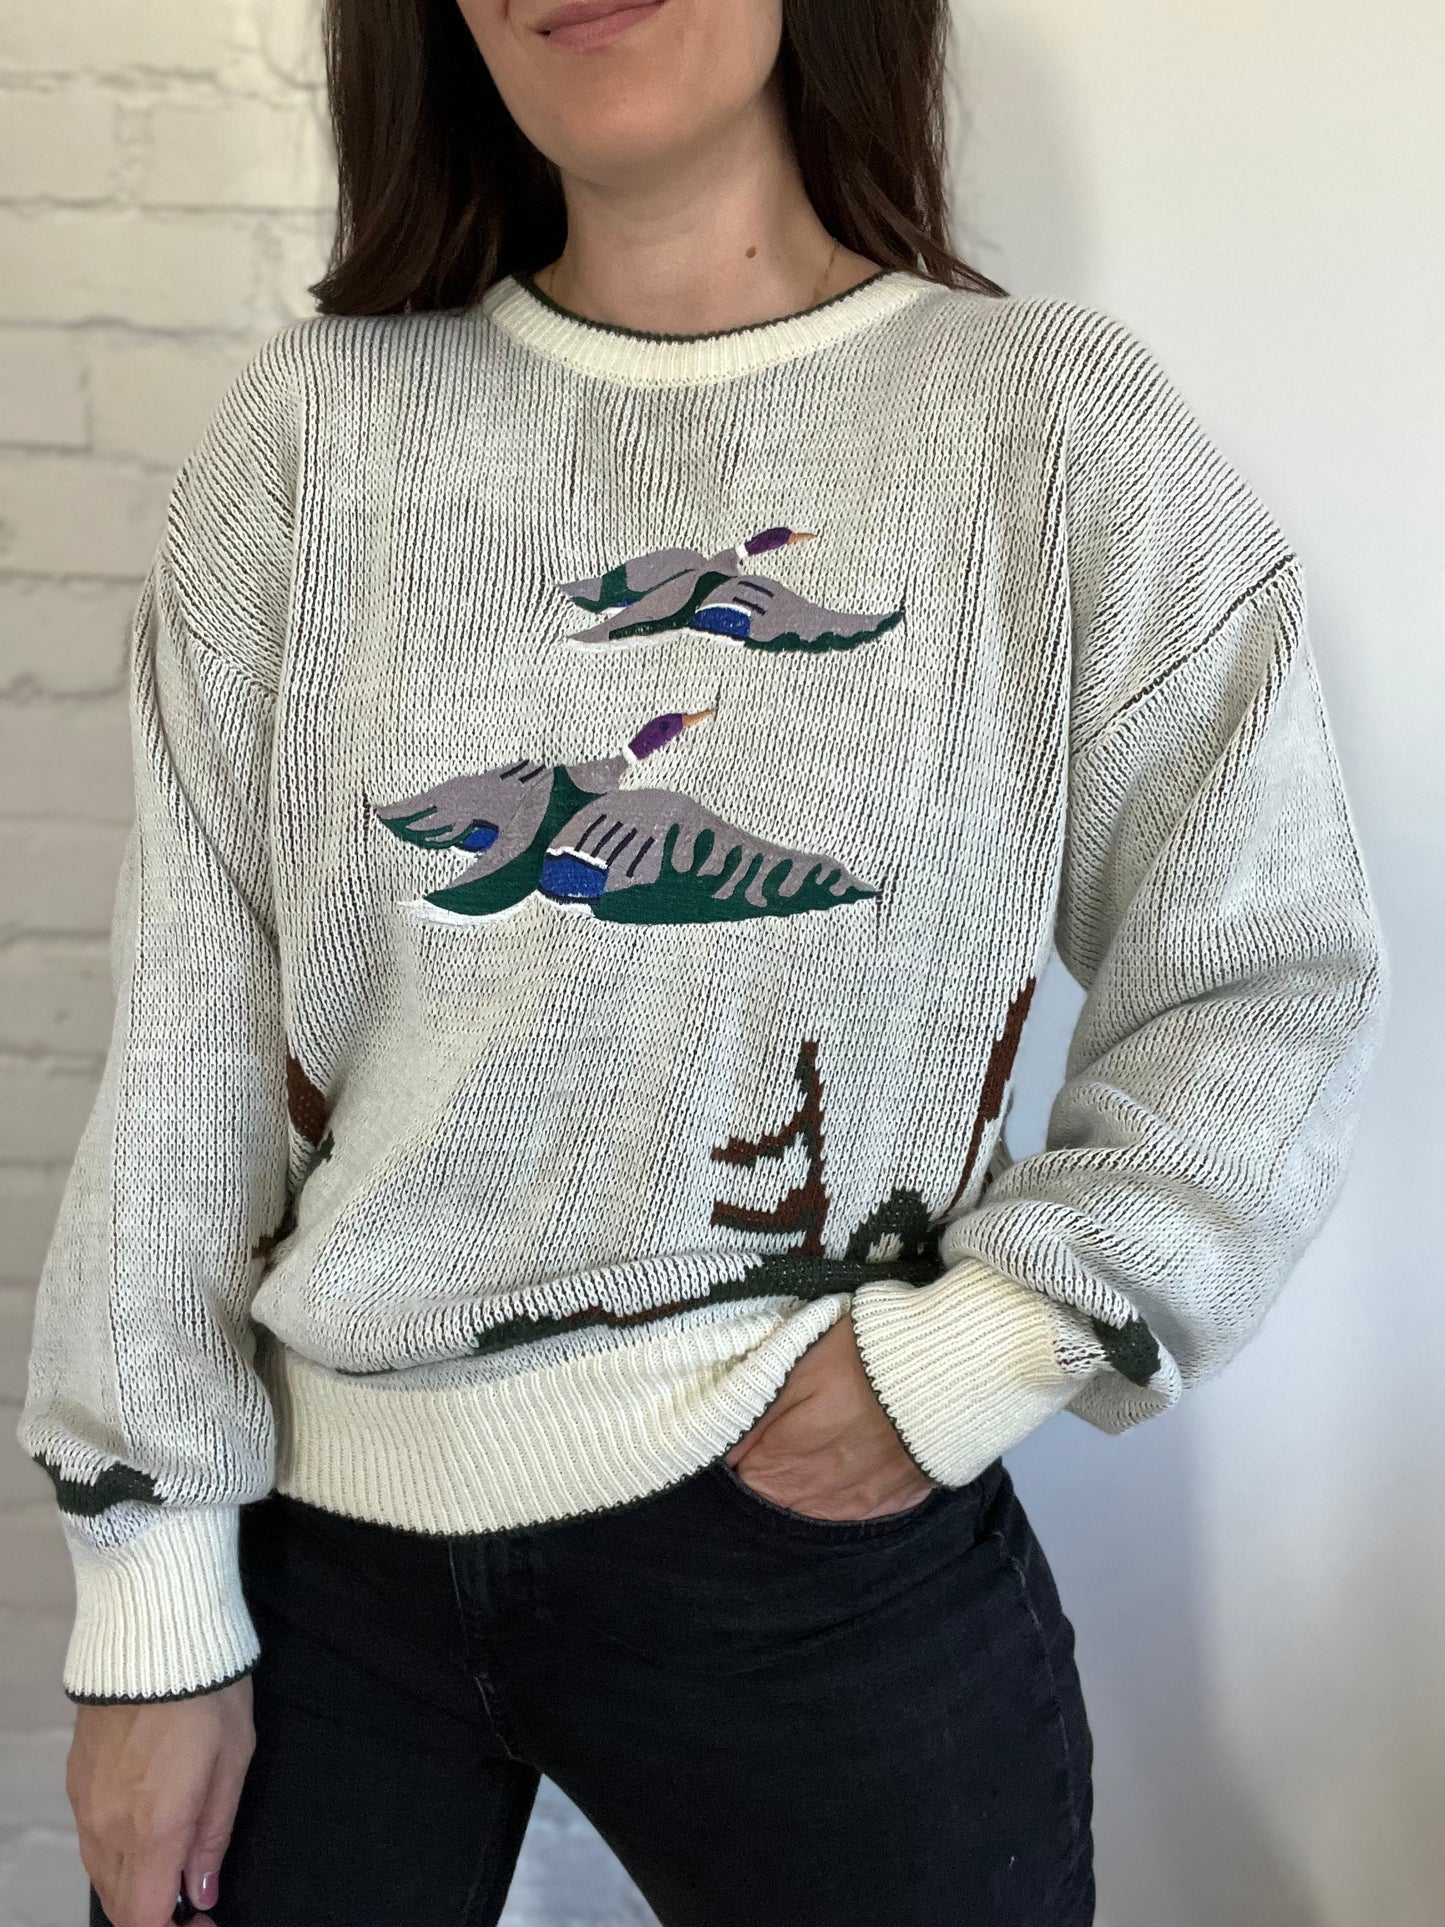 Flying Duck Knit Sweater - Size L/XL